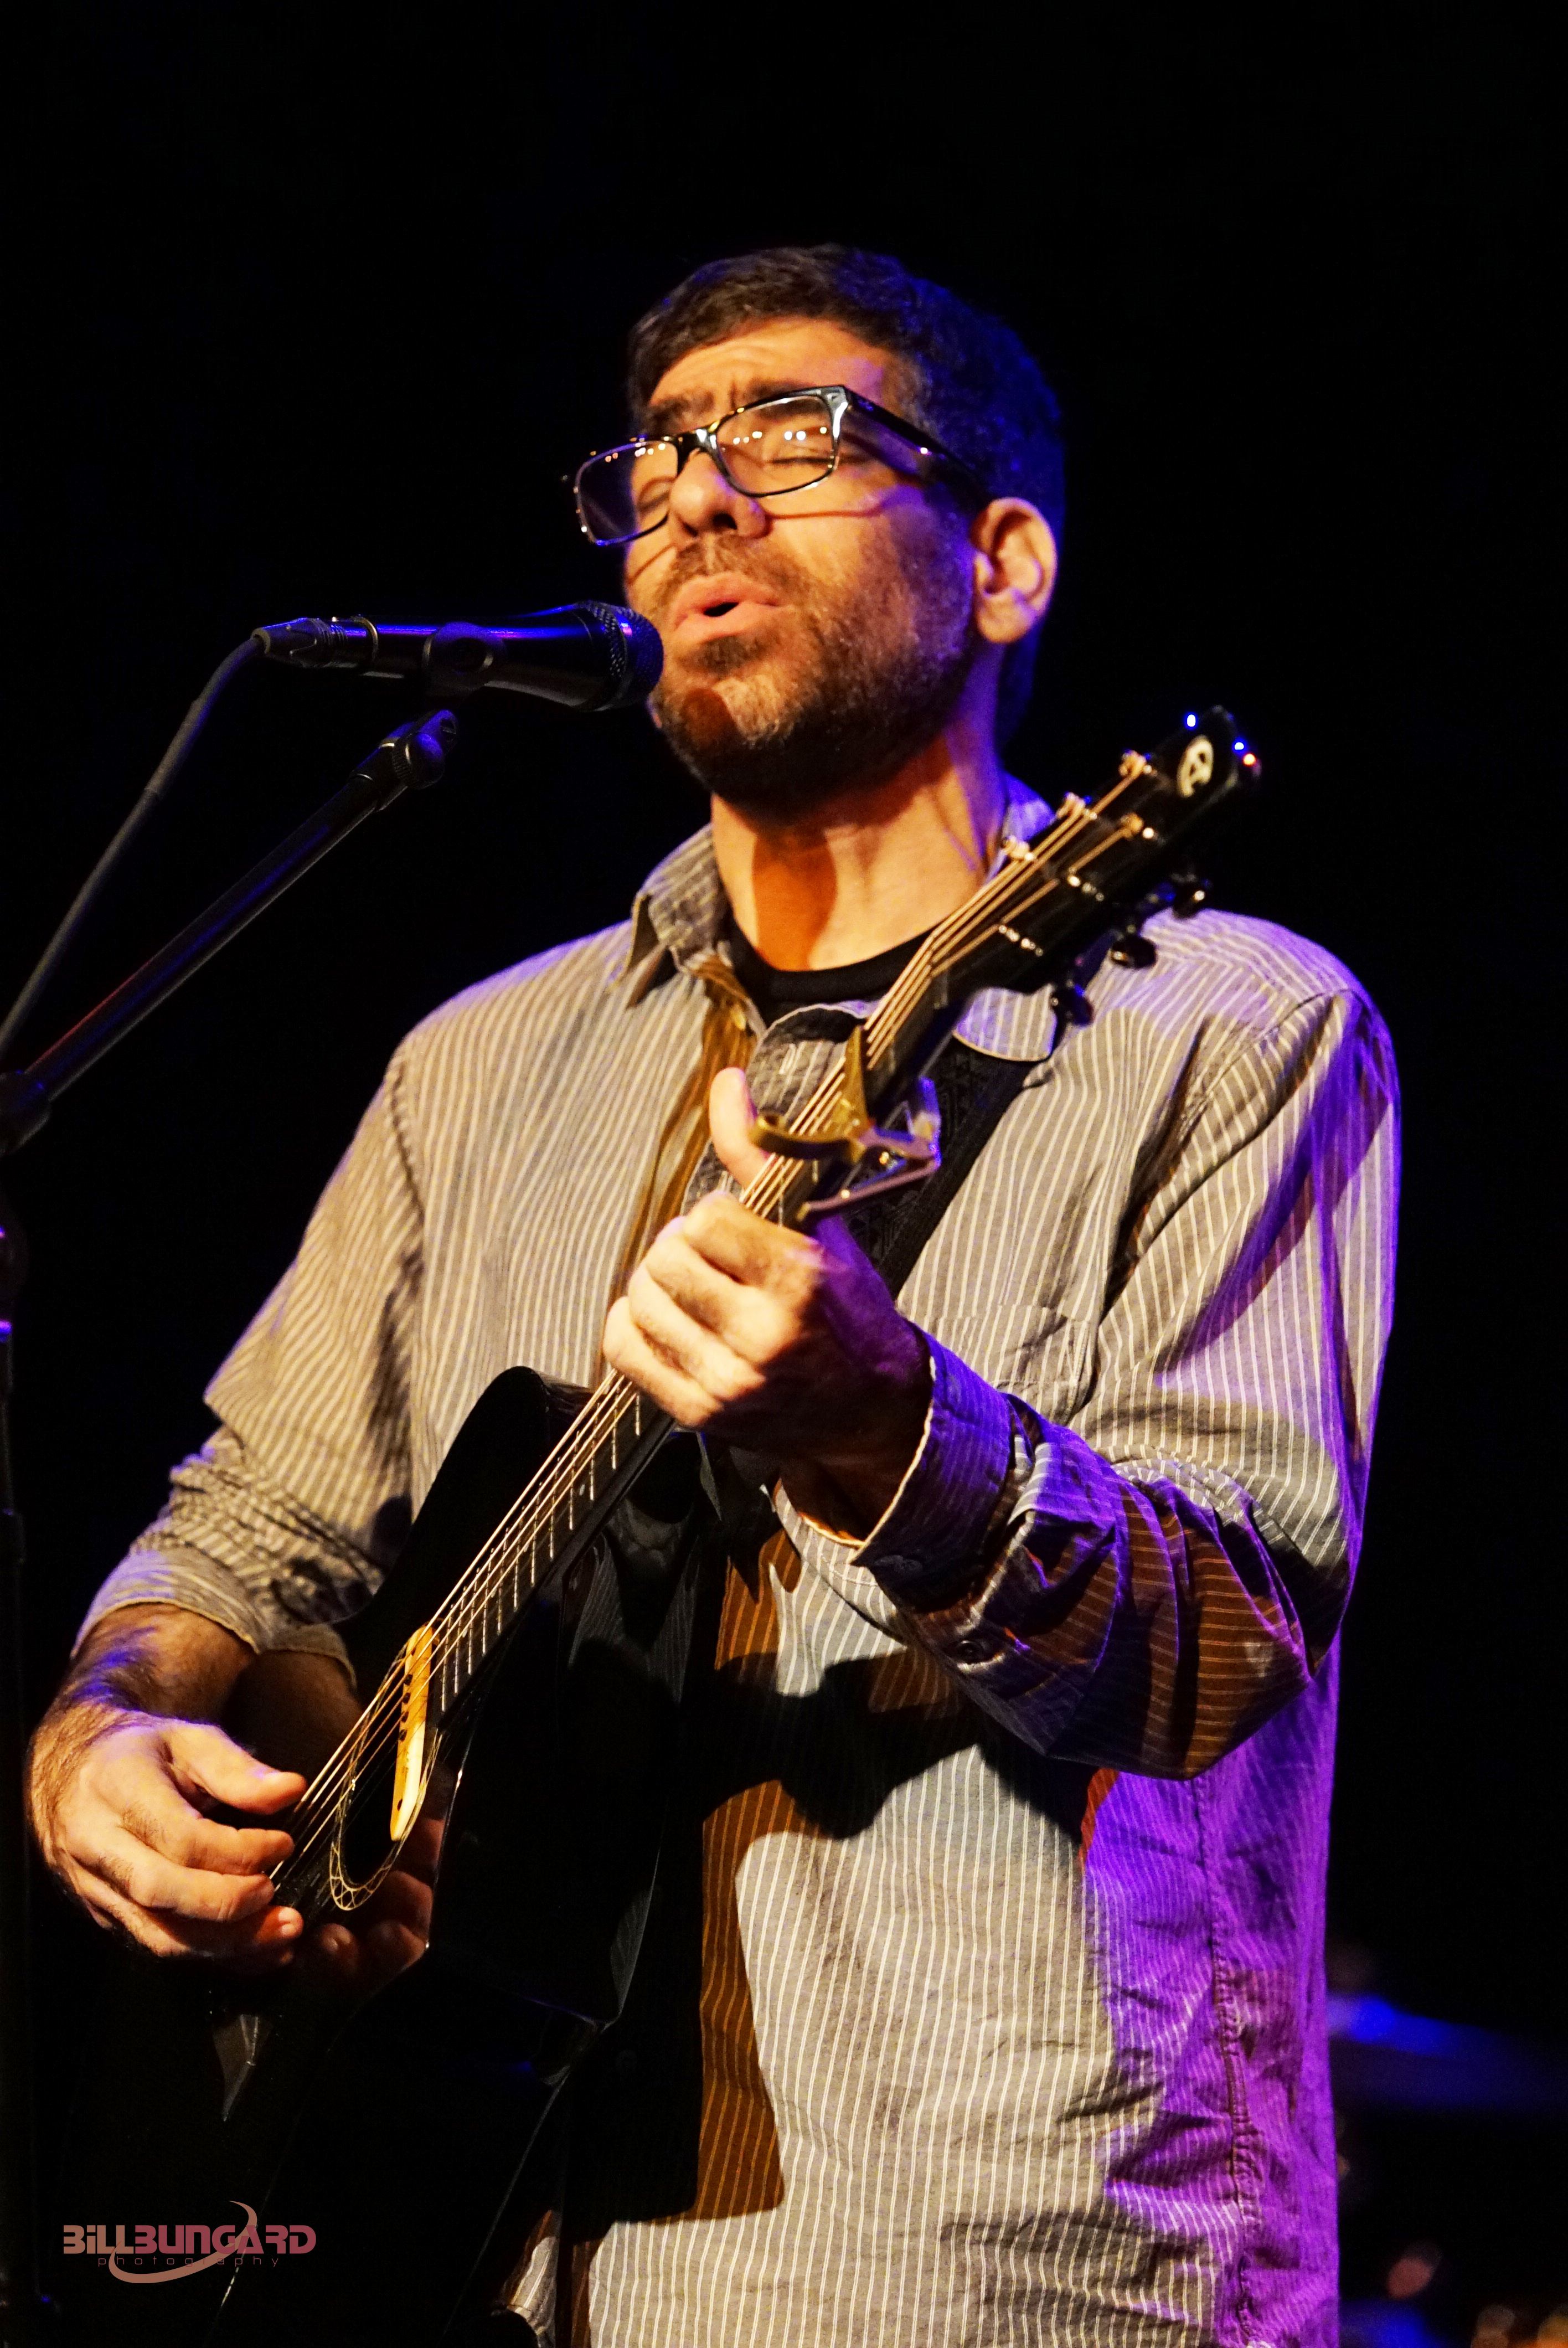 Tobias the Owl at The Triple Door (Photo by Bill Bungard)